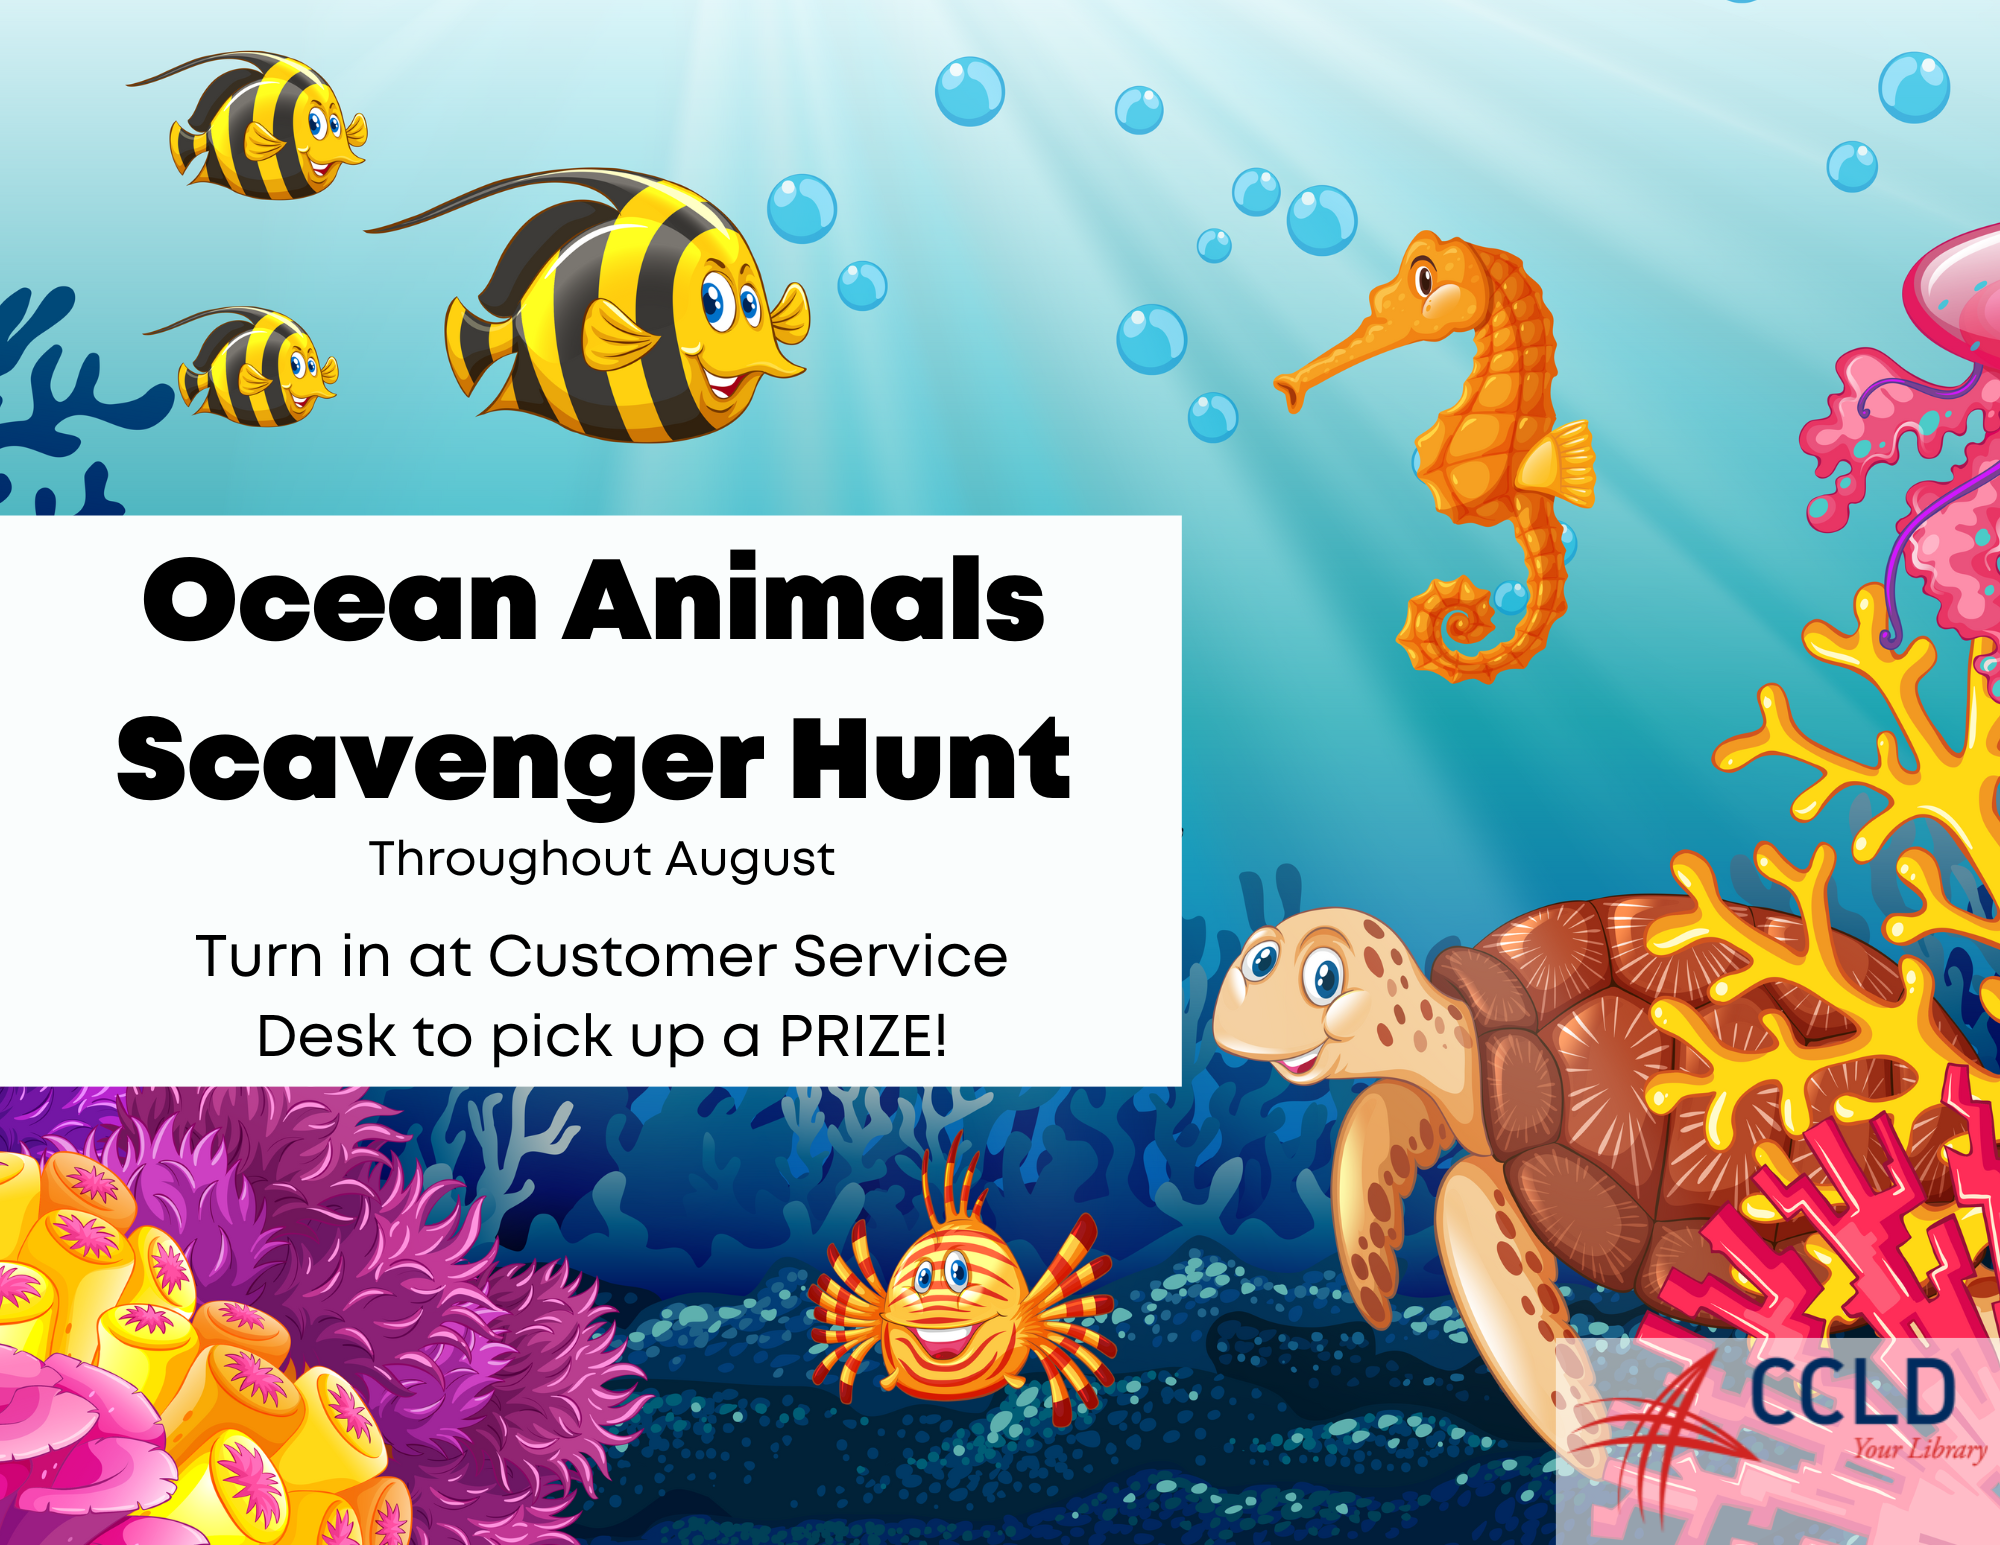 Come to the Steele Memorial Library Children's Department throughout August to participate in our Ocean Animals Scavenger Hunt.

Pick up you Scavenger Hunt in the Children's Department and turn it in at the Customer Service desk near the exit to pick up your prize!